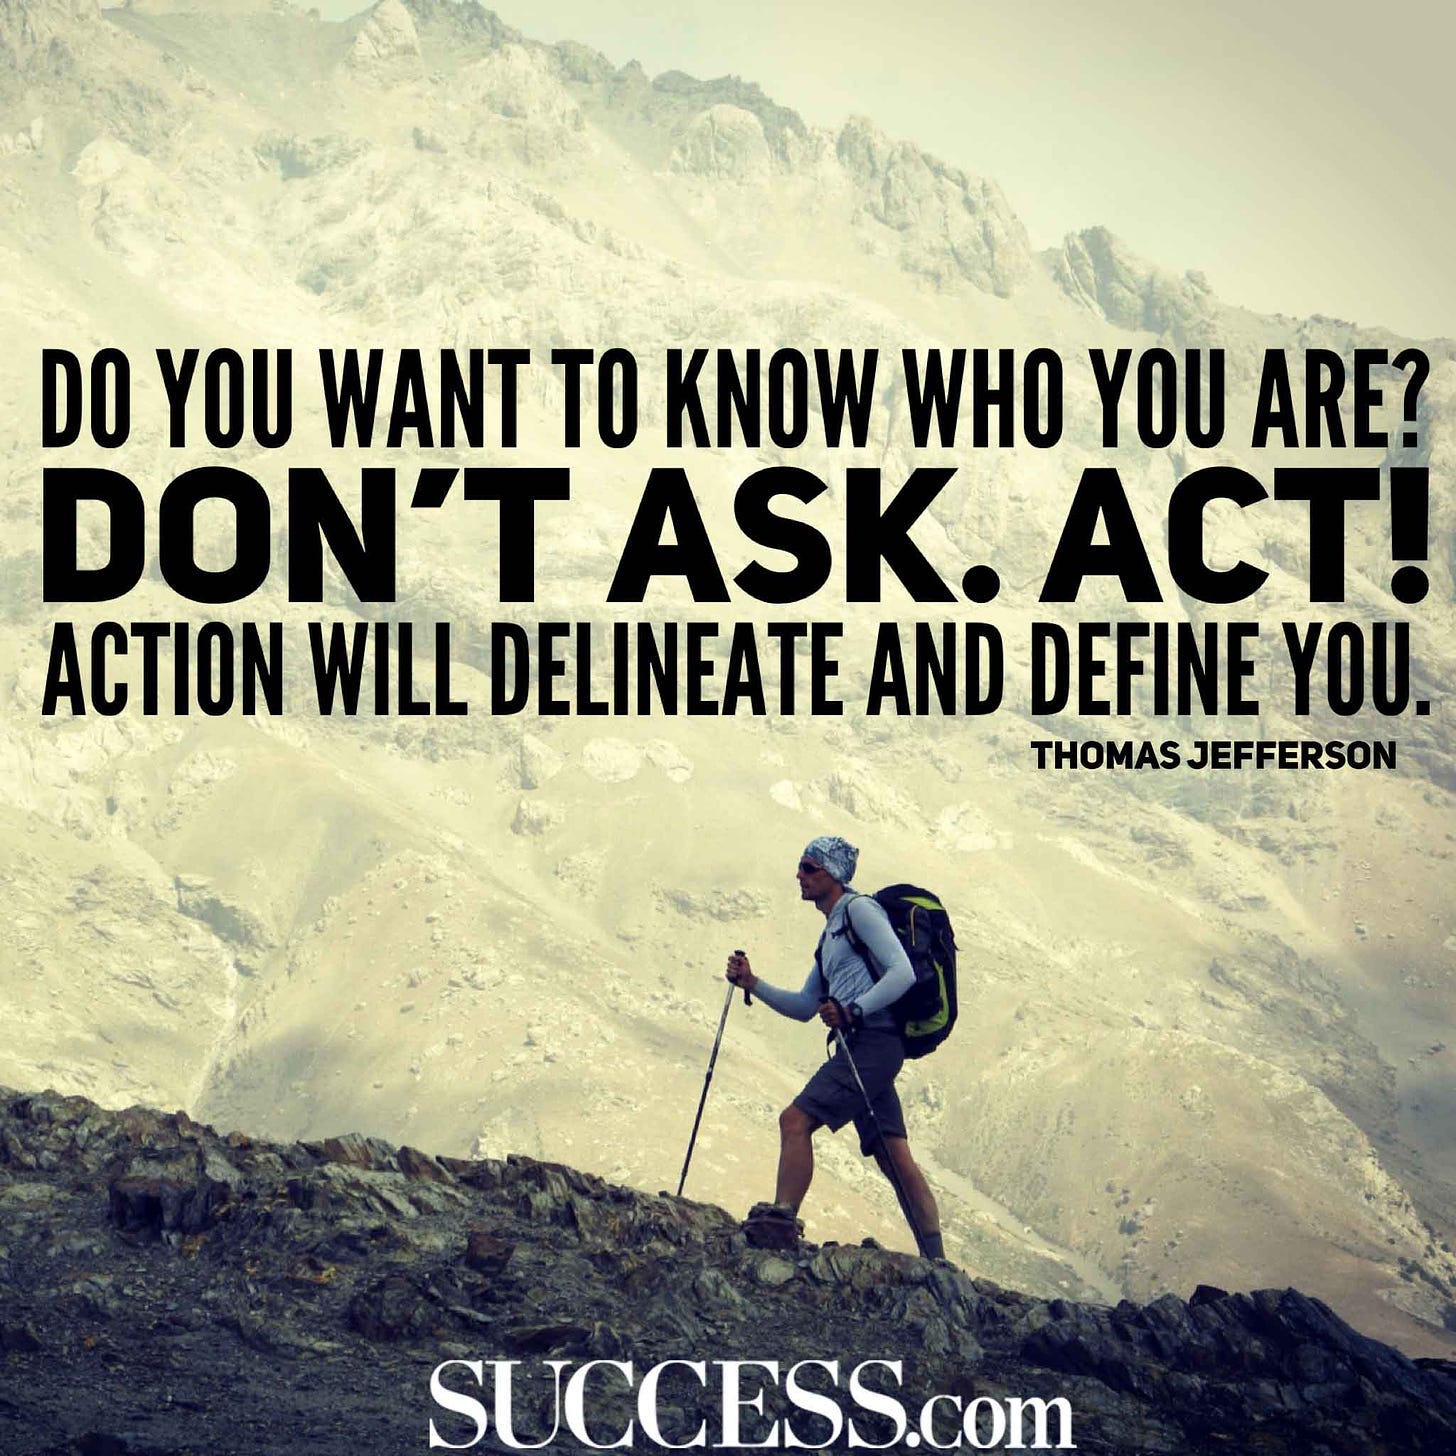 Ready, Set, Go! 13 Quotes to Inspire You to Take Action | SUCCESS